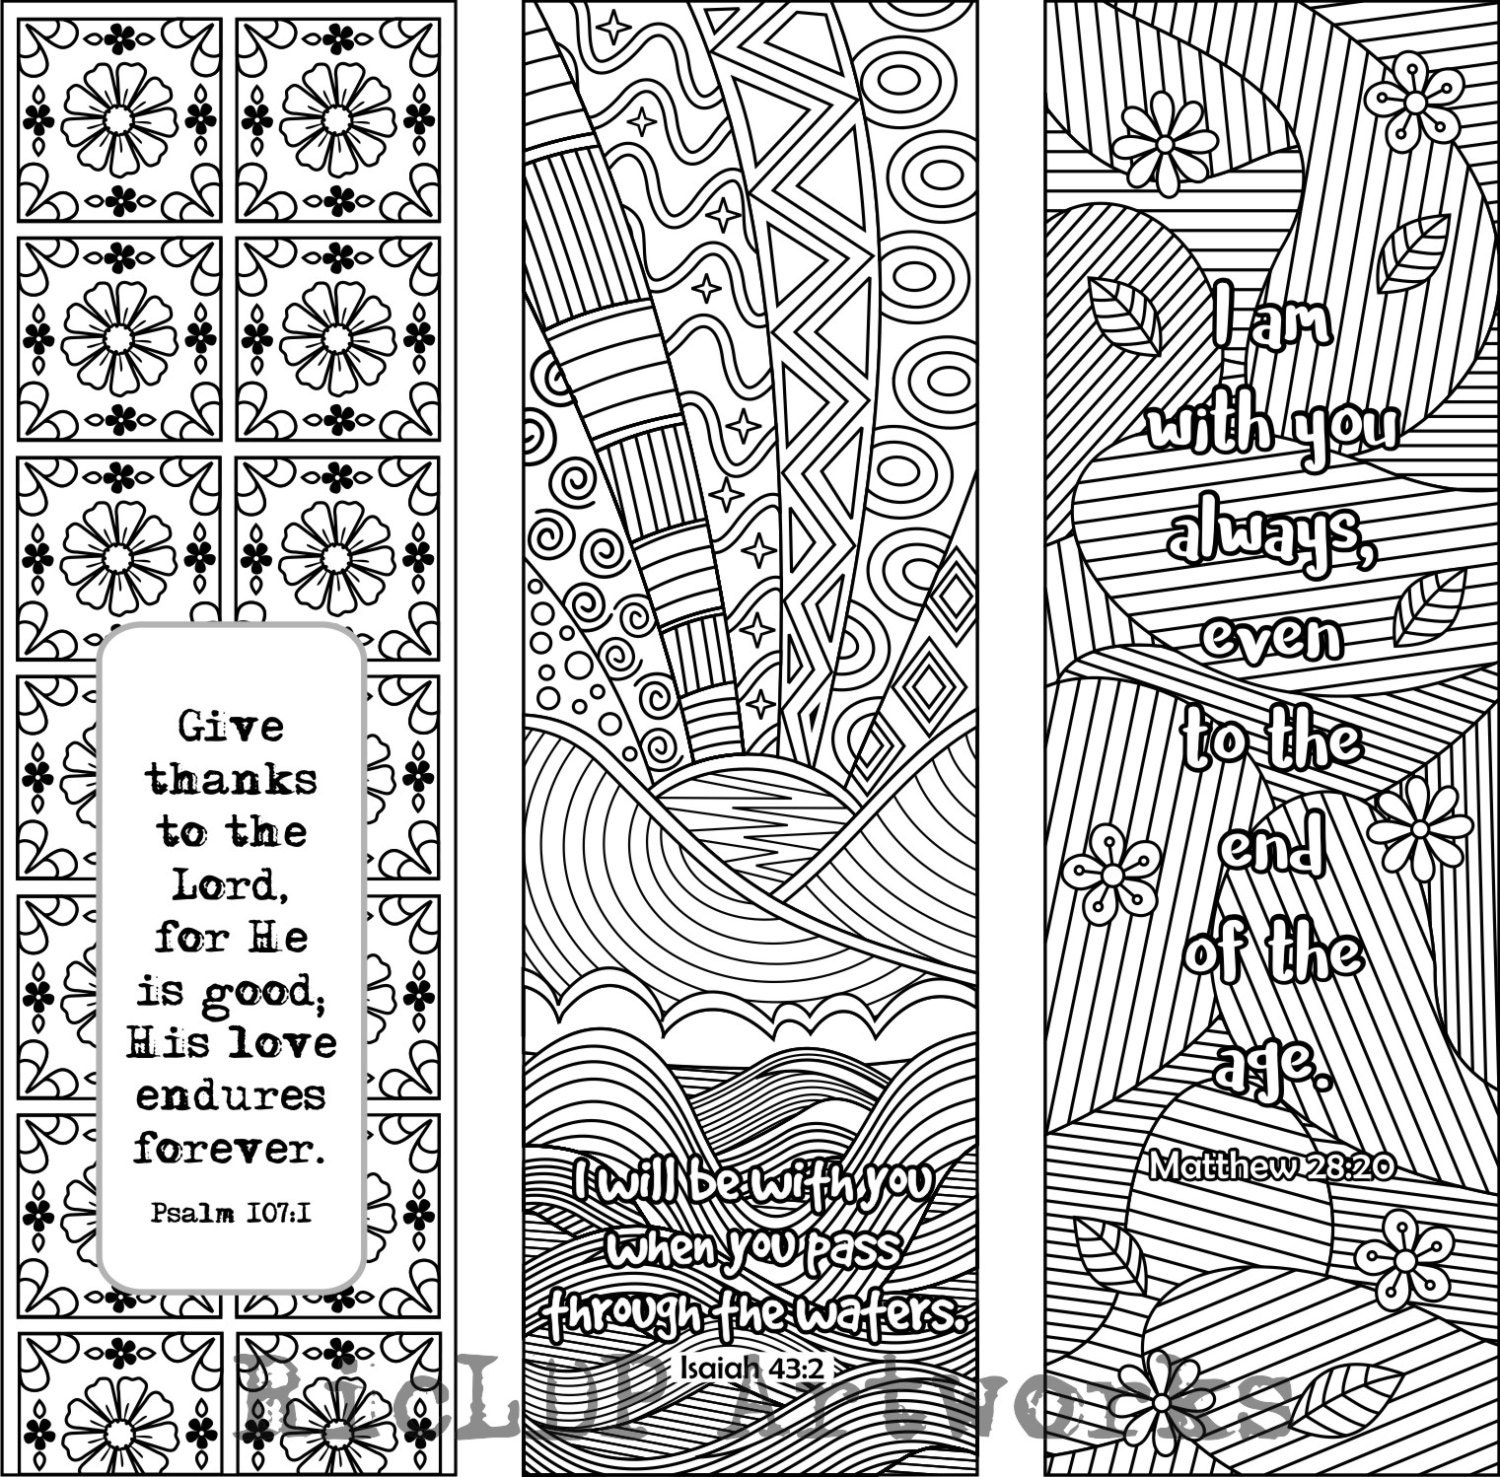 6 bible verse coloring bookmarks plus 3 designs with blank